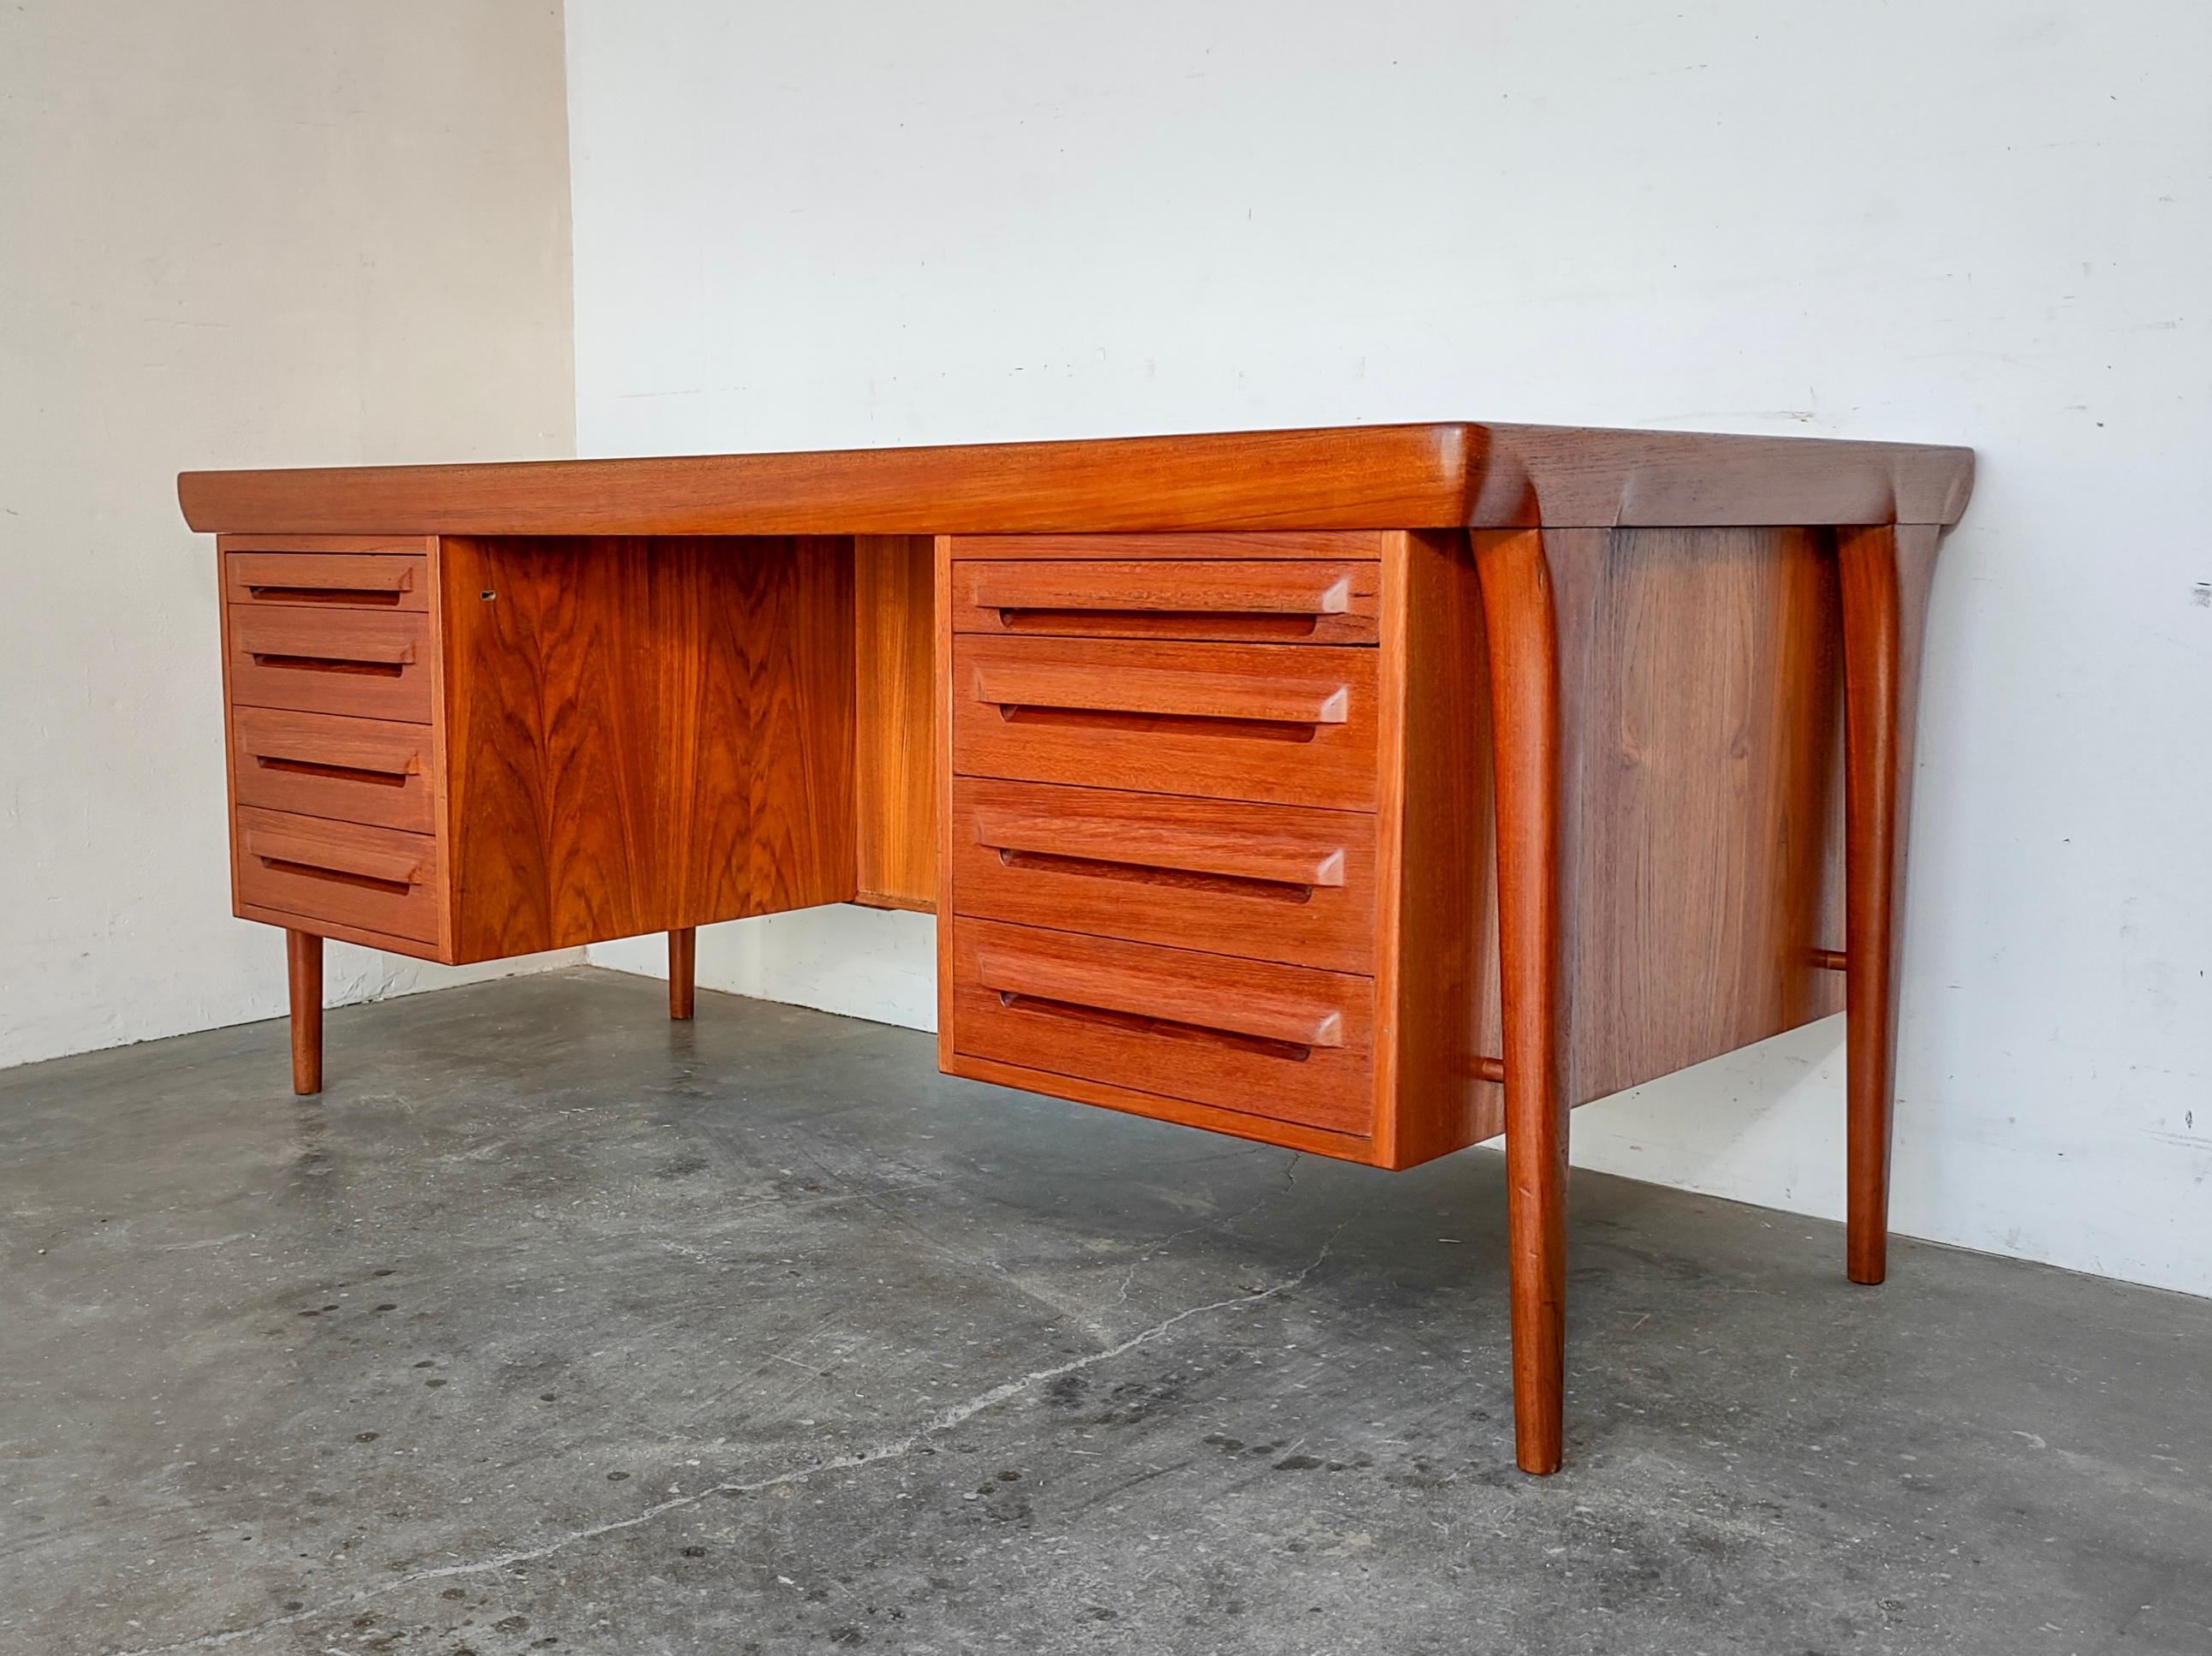 Stunning rare teak executive desk with sculpted legs and drawer faces designed by Ib Kofod Larsen and made in Denmark by Faarup Mobelfabrik. It has six drawers and two pull-out trays disguised as a top drawer on each side. The tray on the left has